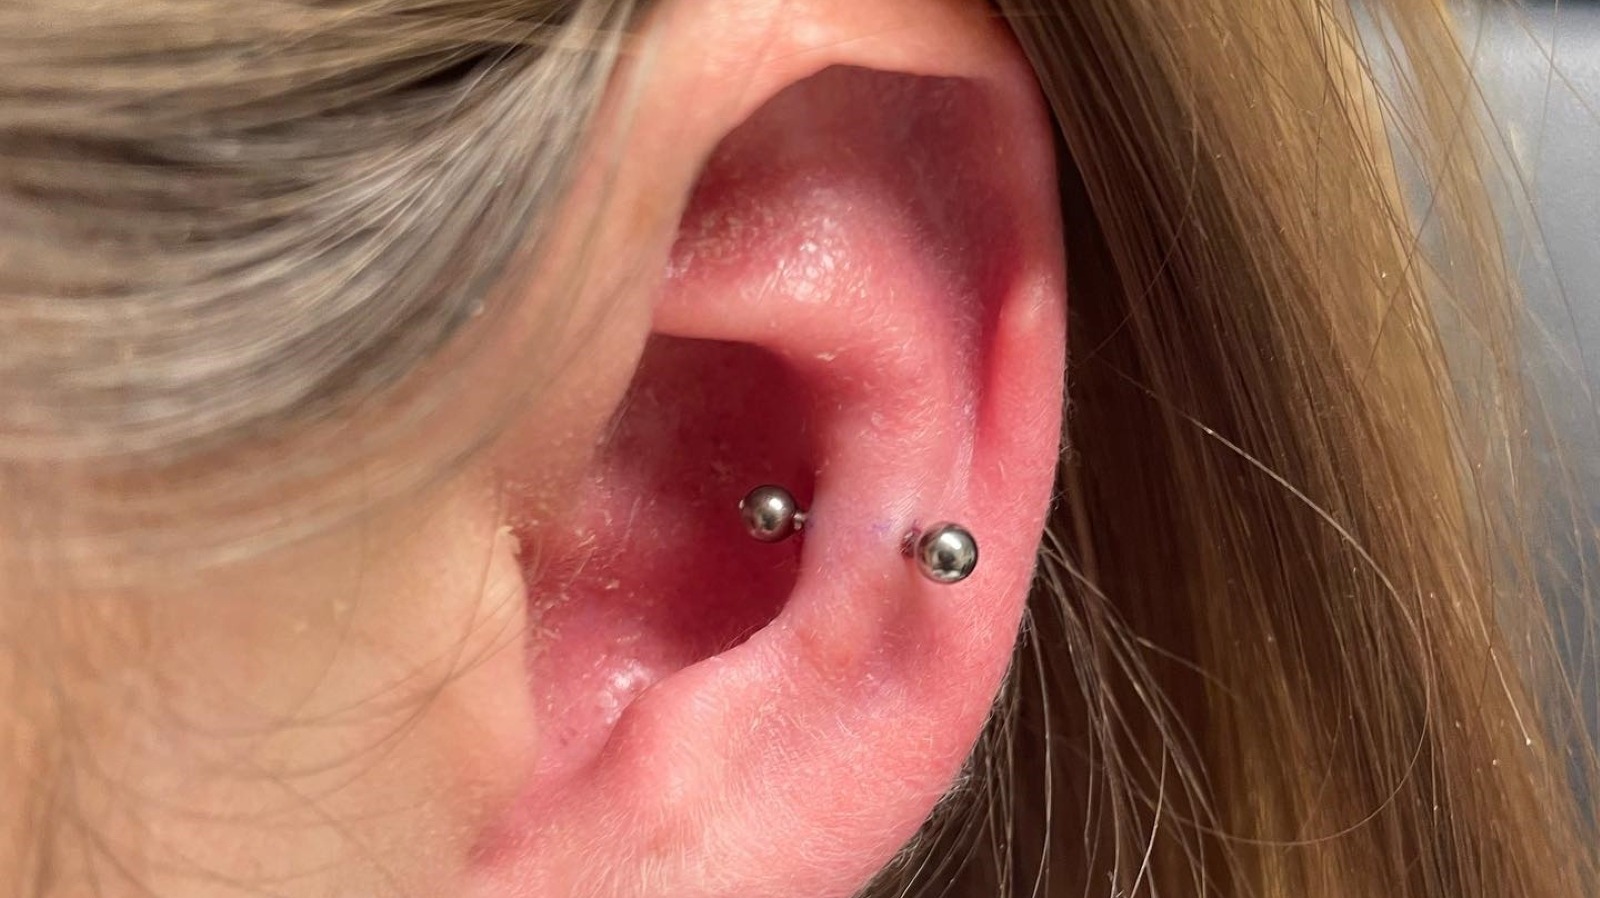 Ask Body Candy: I Just Got Pierced When Can I Change My Jewelry